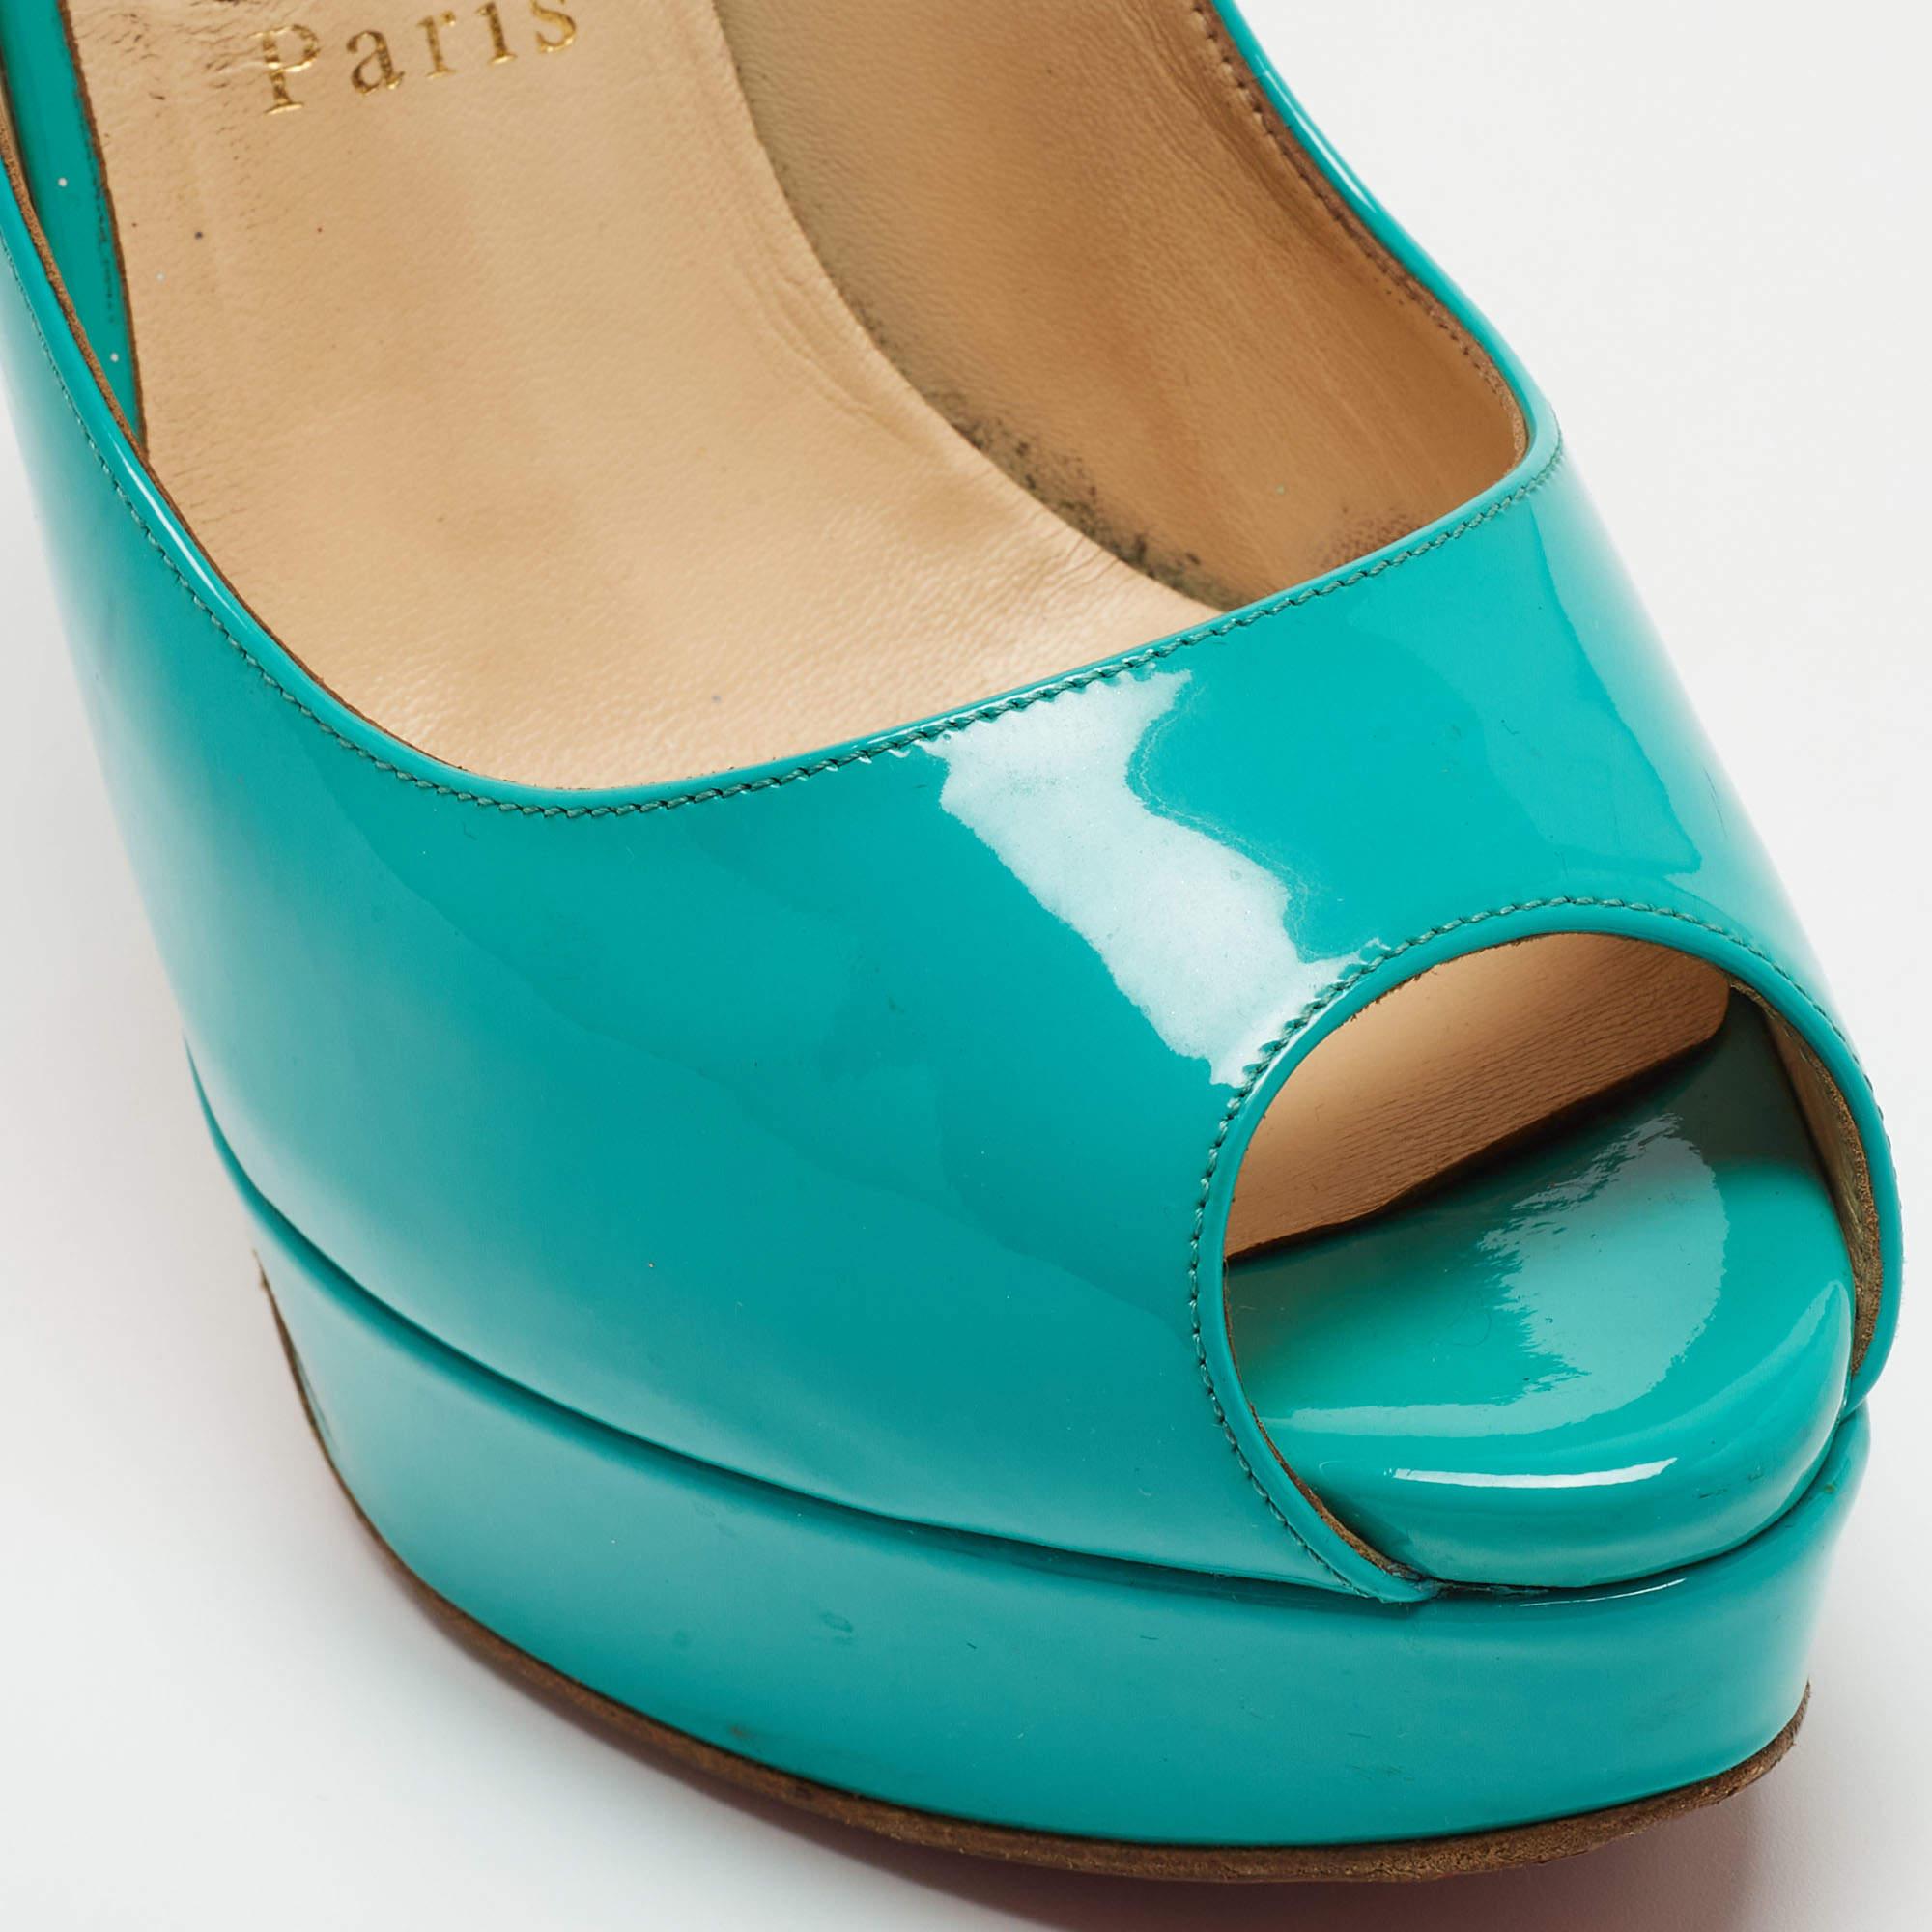 Christian Louboutin Turquoise Patent Leather Lady Peep Sling Pumps Size 39.5 For Sale 4